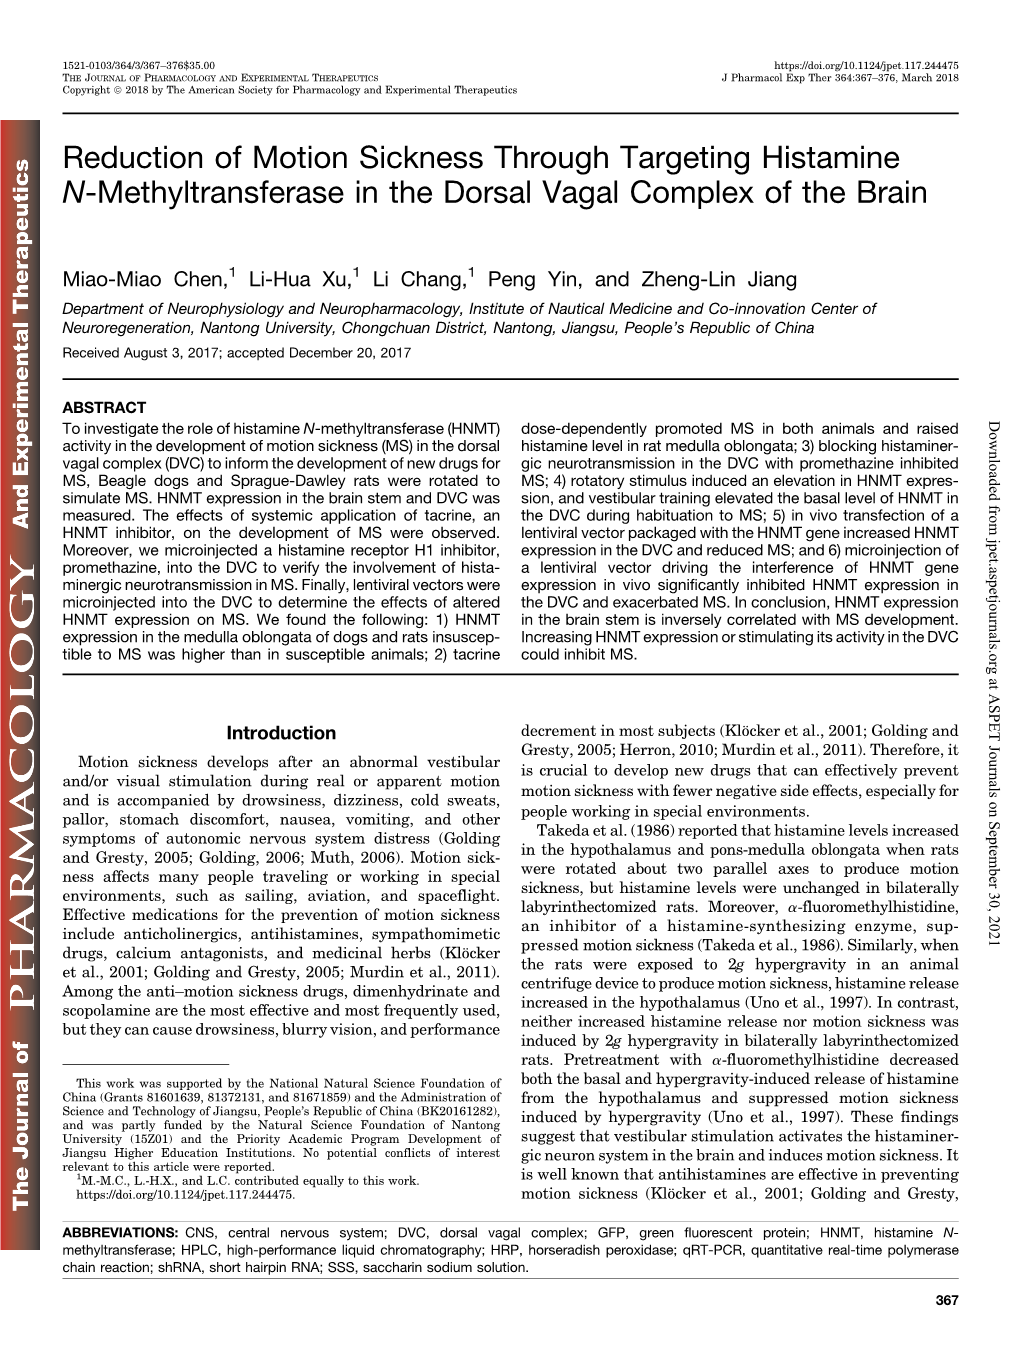 Reduction of Motion Sickness Through Targeting Histamine N-Methyltransferase in the Dorsal Vagal Complex of the Brain